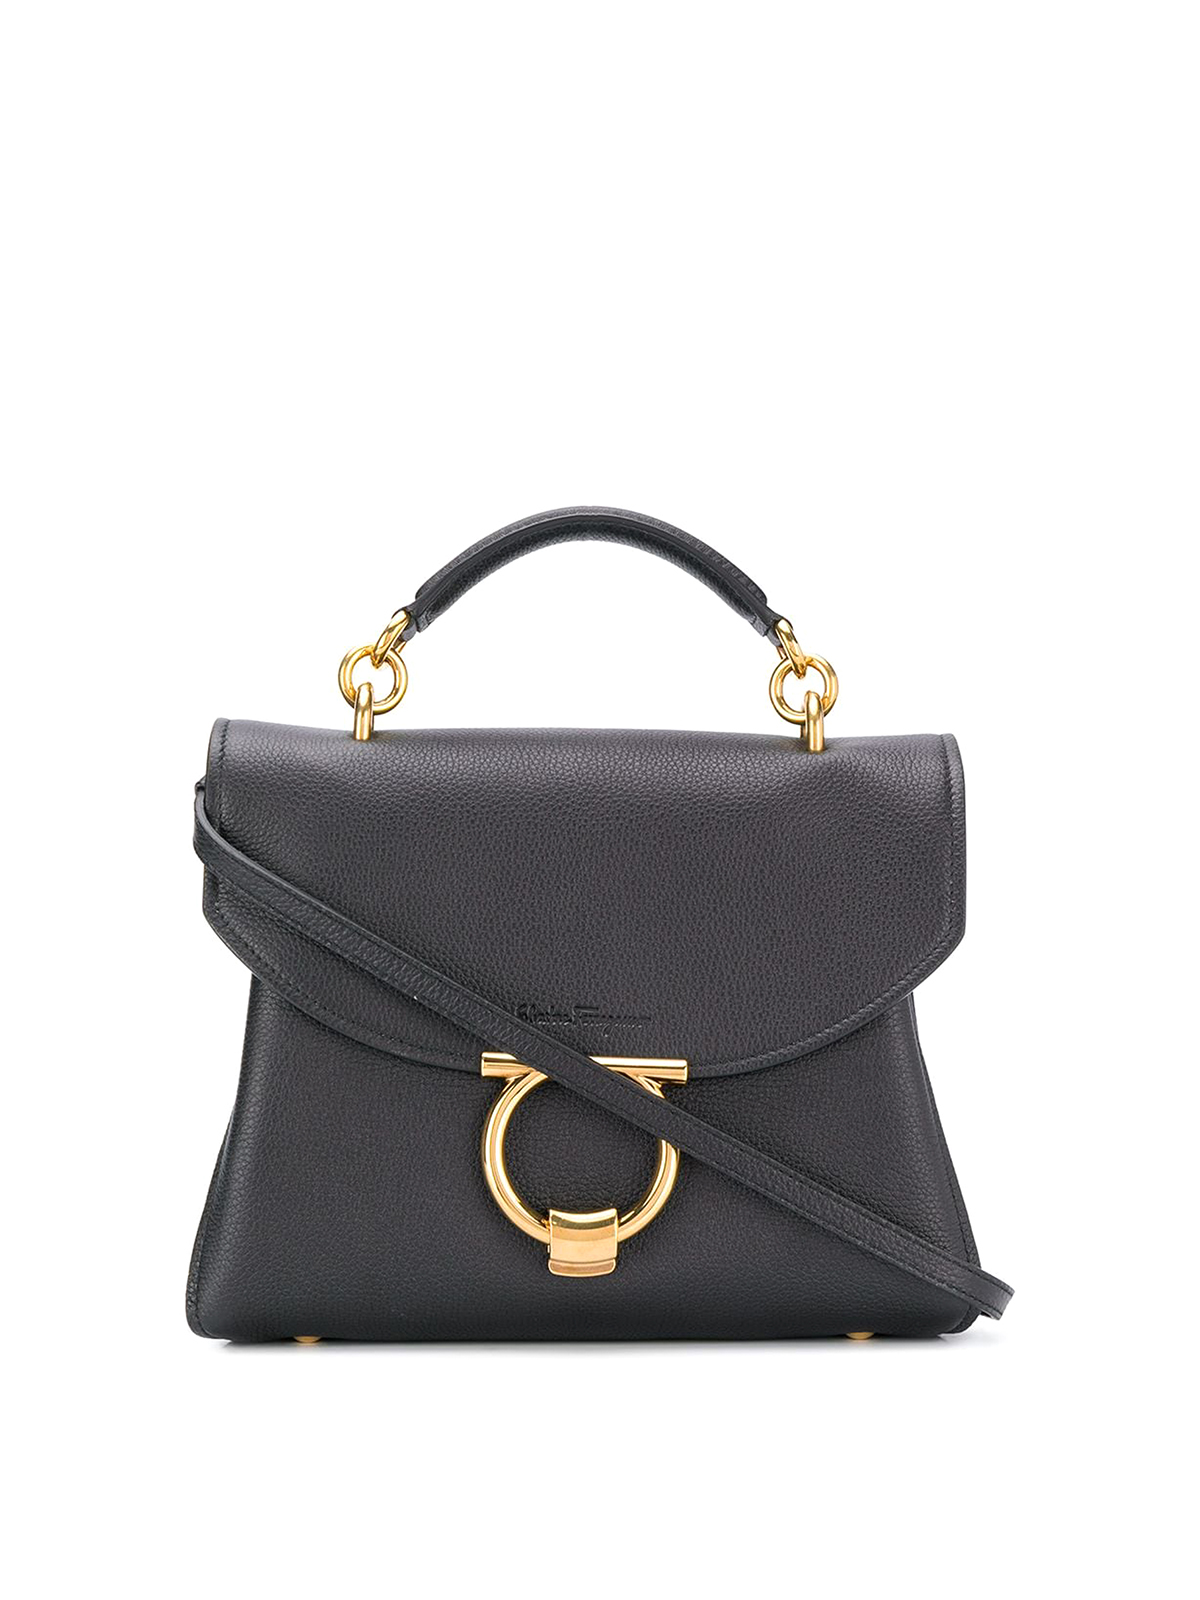 Ferragamo Hammered Leather Bag With Hardware And Strap In Black